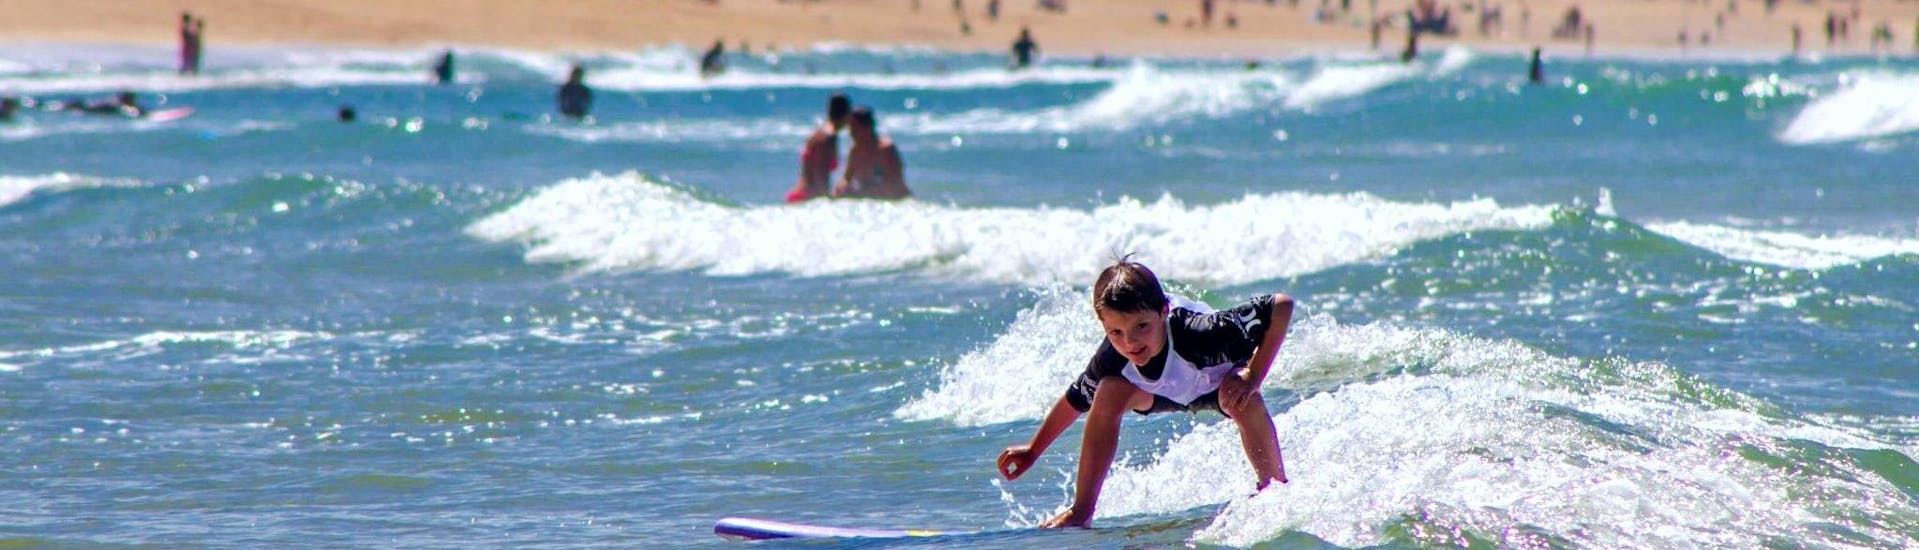 A young kid is surfing a wave thanks to his Surfing Lessons for Kids (6-11 years) - Culs Nus Beach with Hossegor Surf Center.